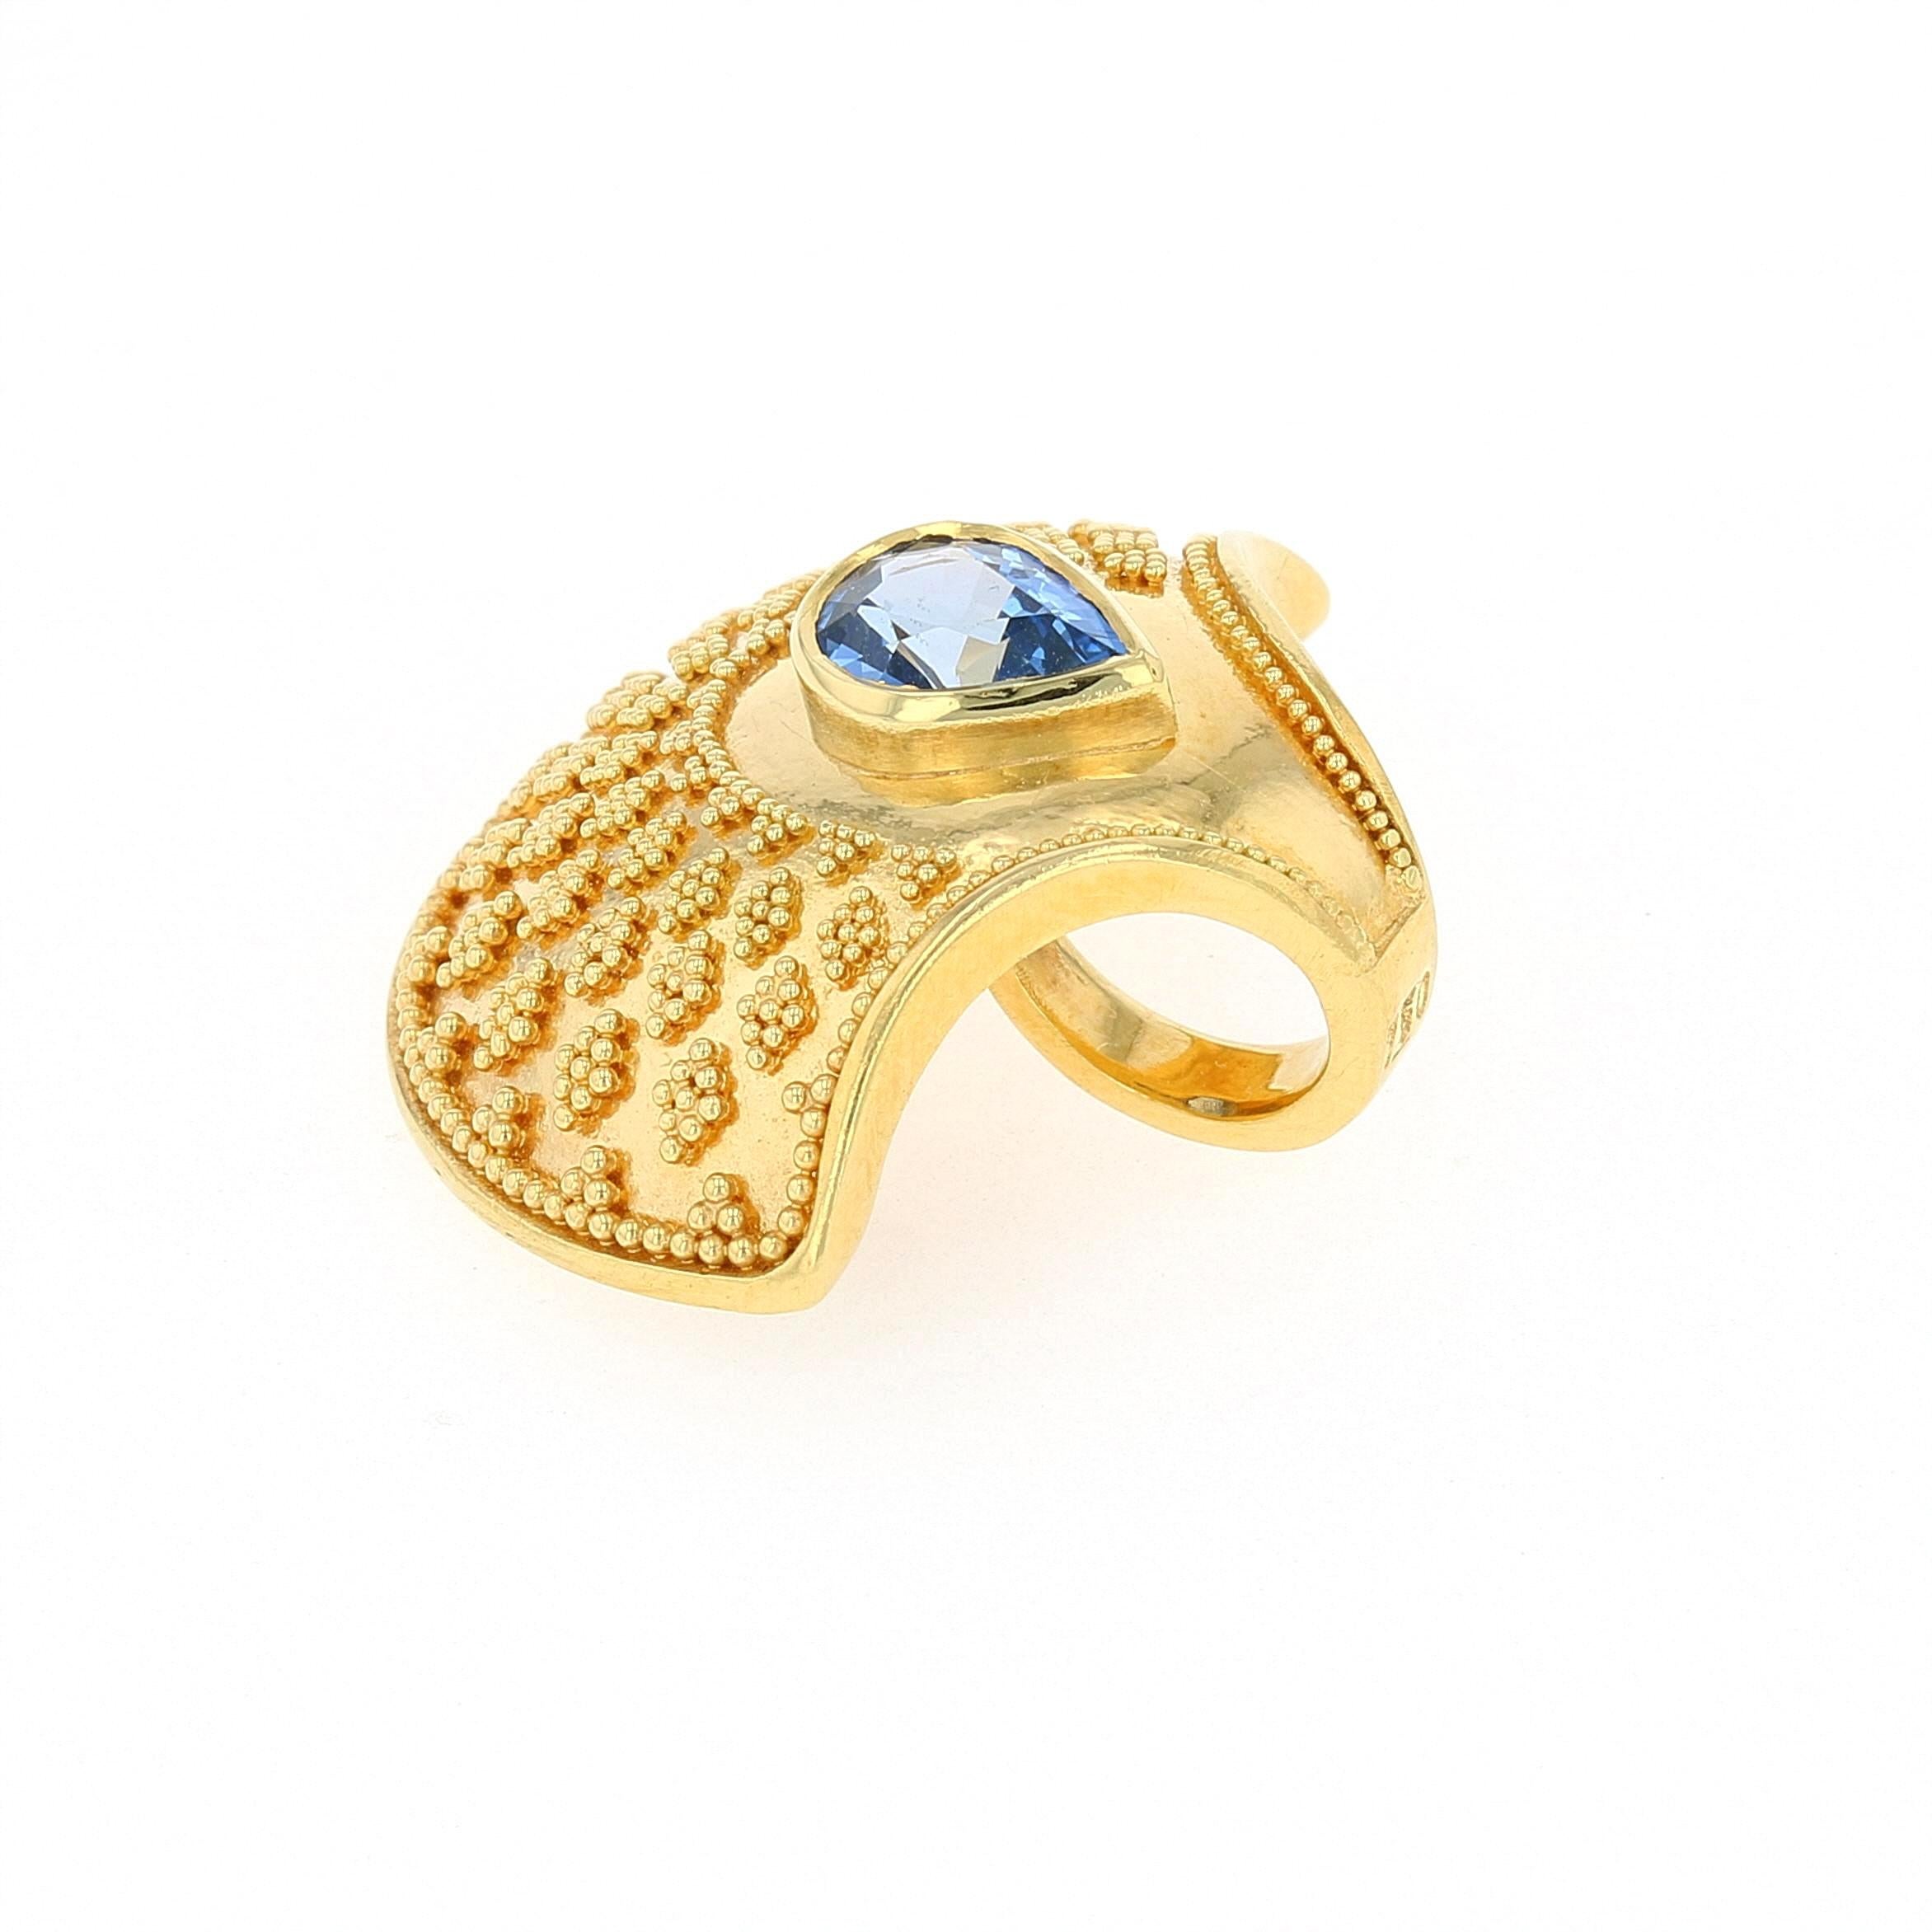 Kent Raible's necklace enhancer features beautiful tapered granules which fan out from the central pear shaped Blue Sapphire, creating an elegant shape reminiscent of an alluring Japanese fan or a cockleshell pattern.
Wear on one of our hand woven